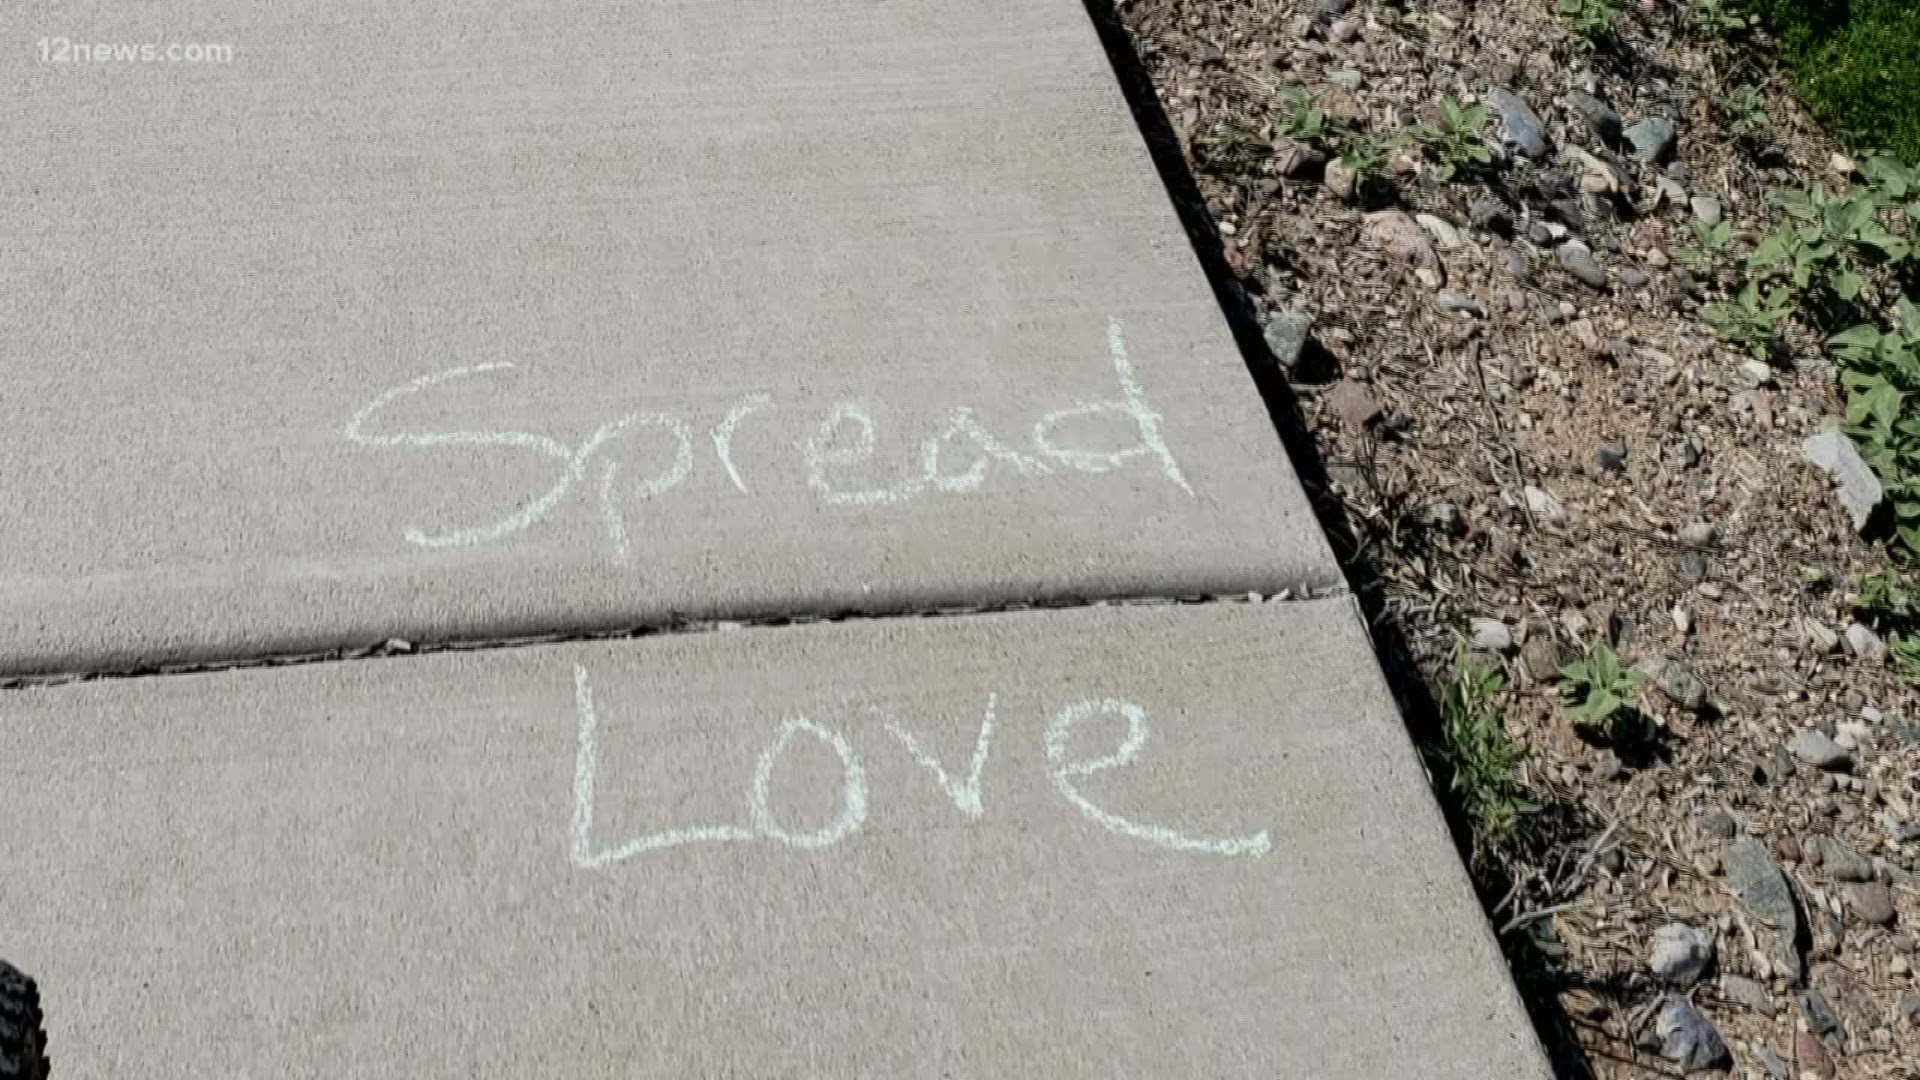 So many good things are happening in the Valley community from songs, to helping others, to using chalk. Here are some ways people are trying to #SendTheLove.